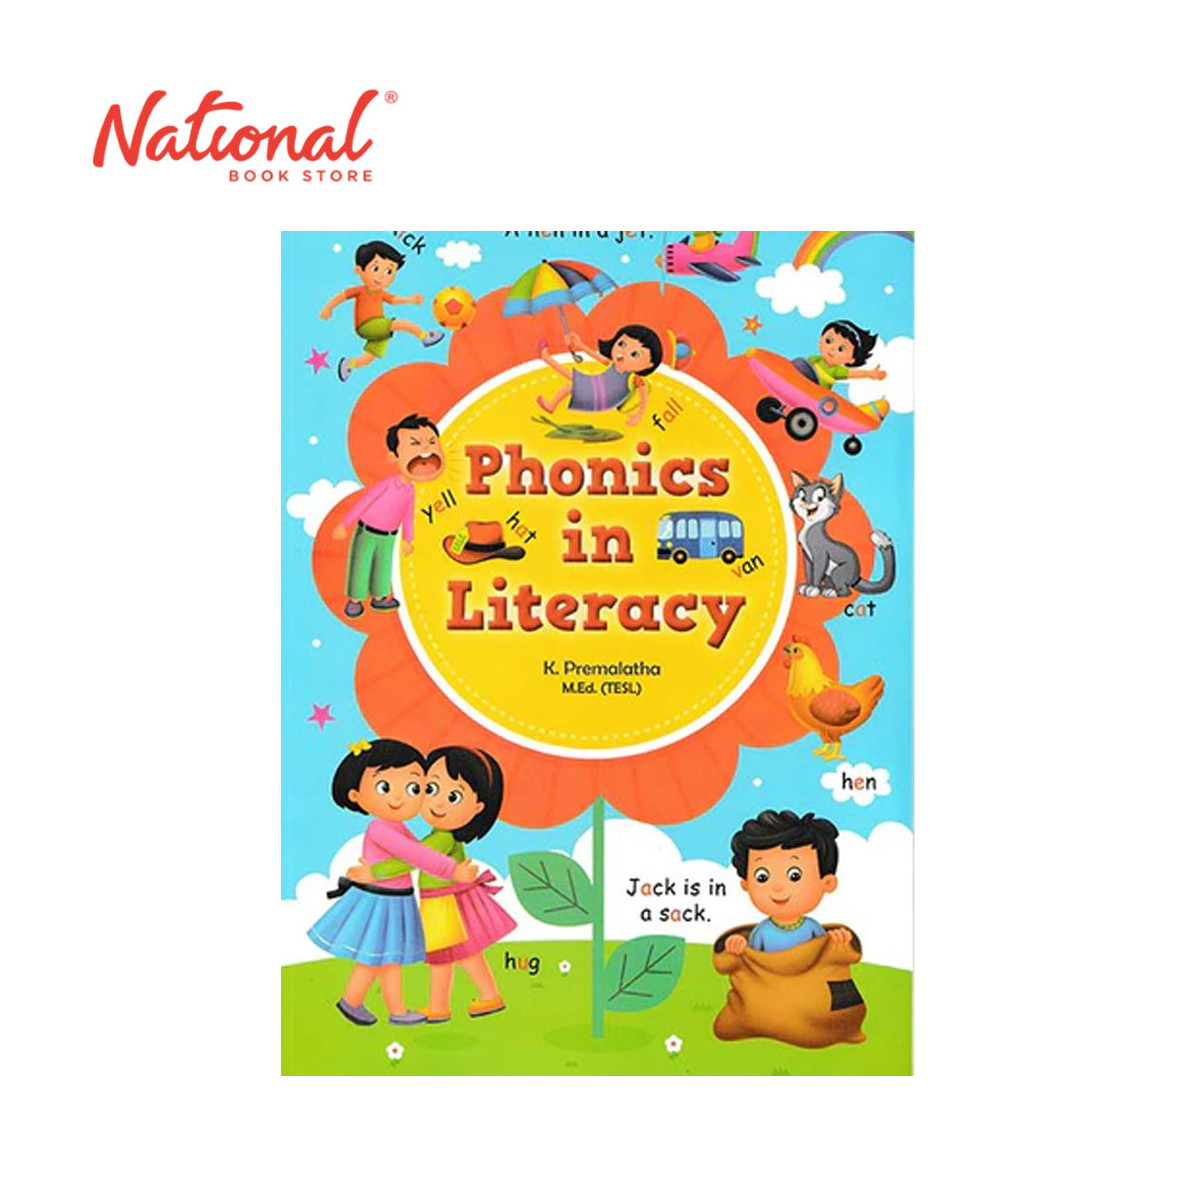 Phonics In Literacy - Trade Paperback - Activity Books for Kids